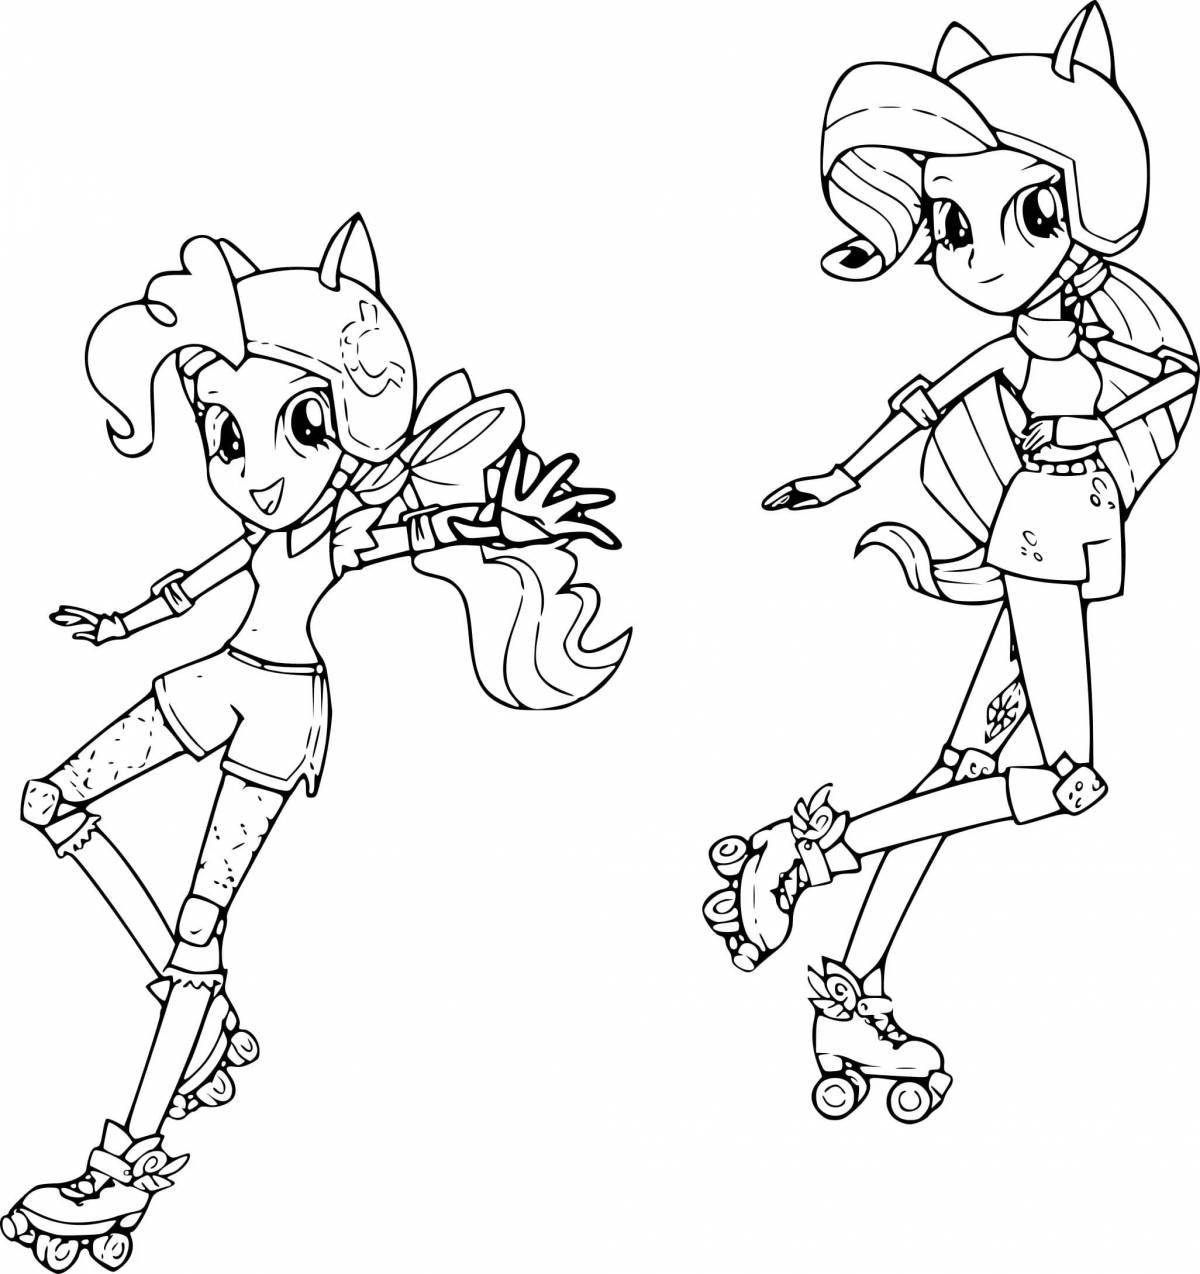 Adorable pony playtime coloring page